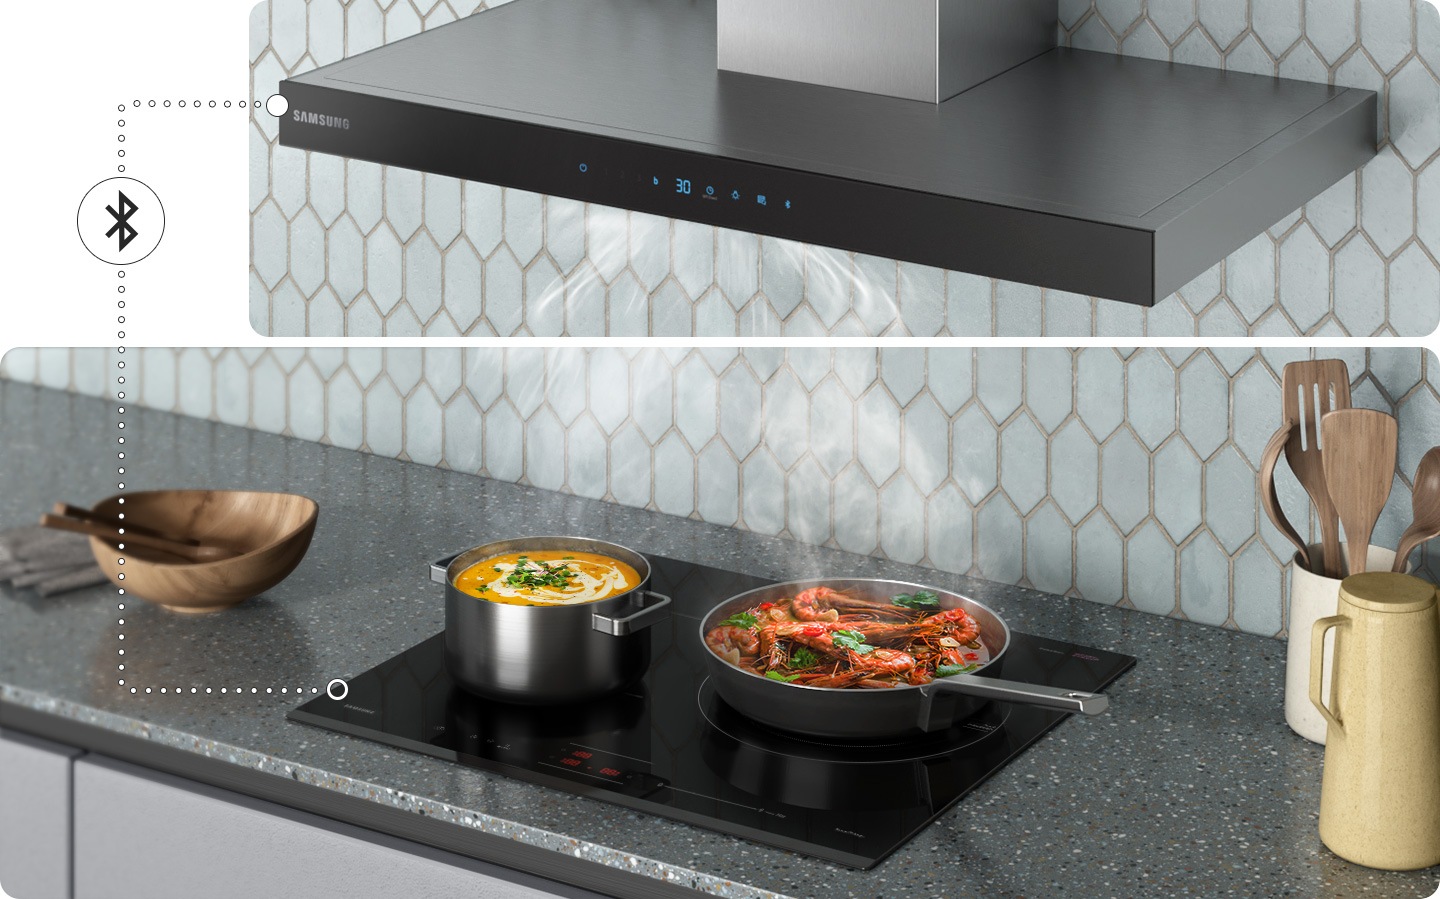 You can control the hood and cooktop at once by connecting them via Bluetooth.